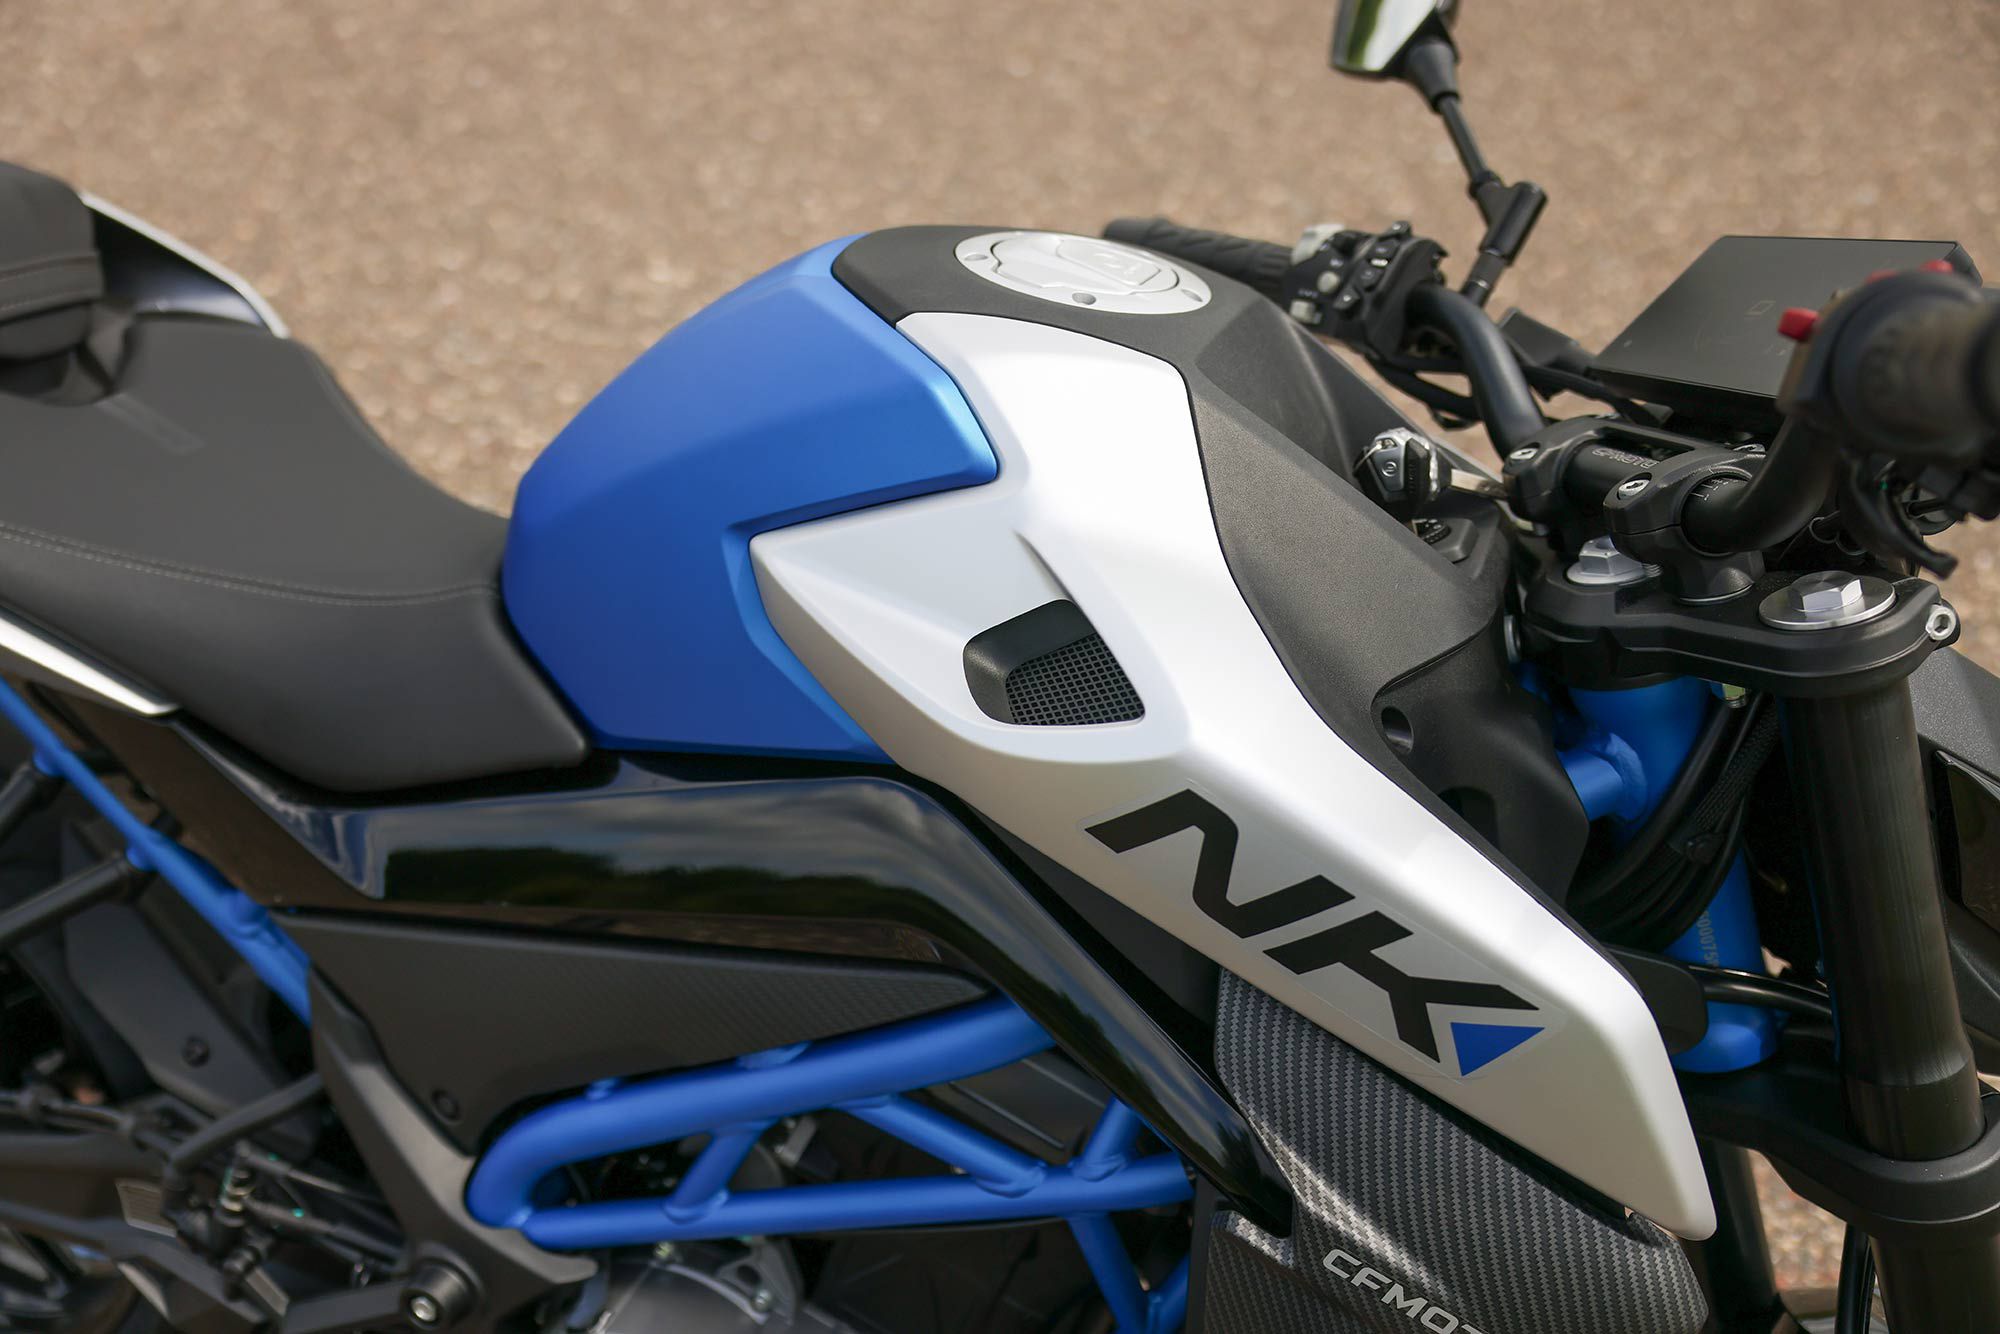 A closer look at the 300NK frame and bodywork highlights the relatively high fit and finish of CFMOTO’s bikes.